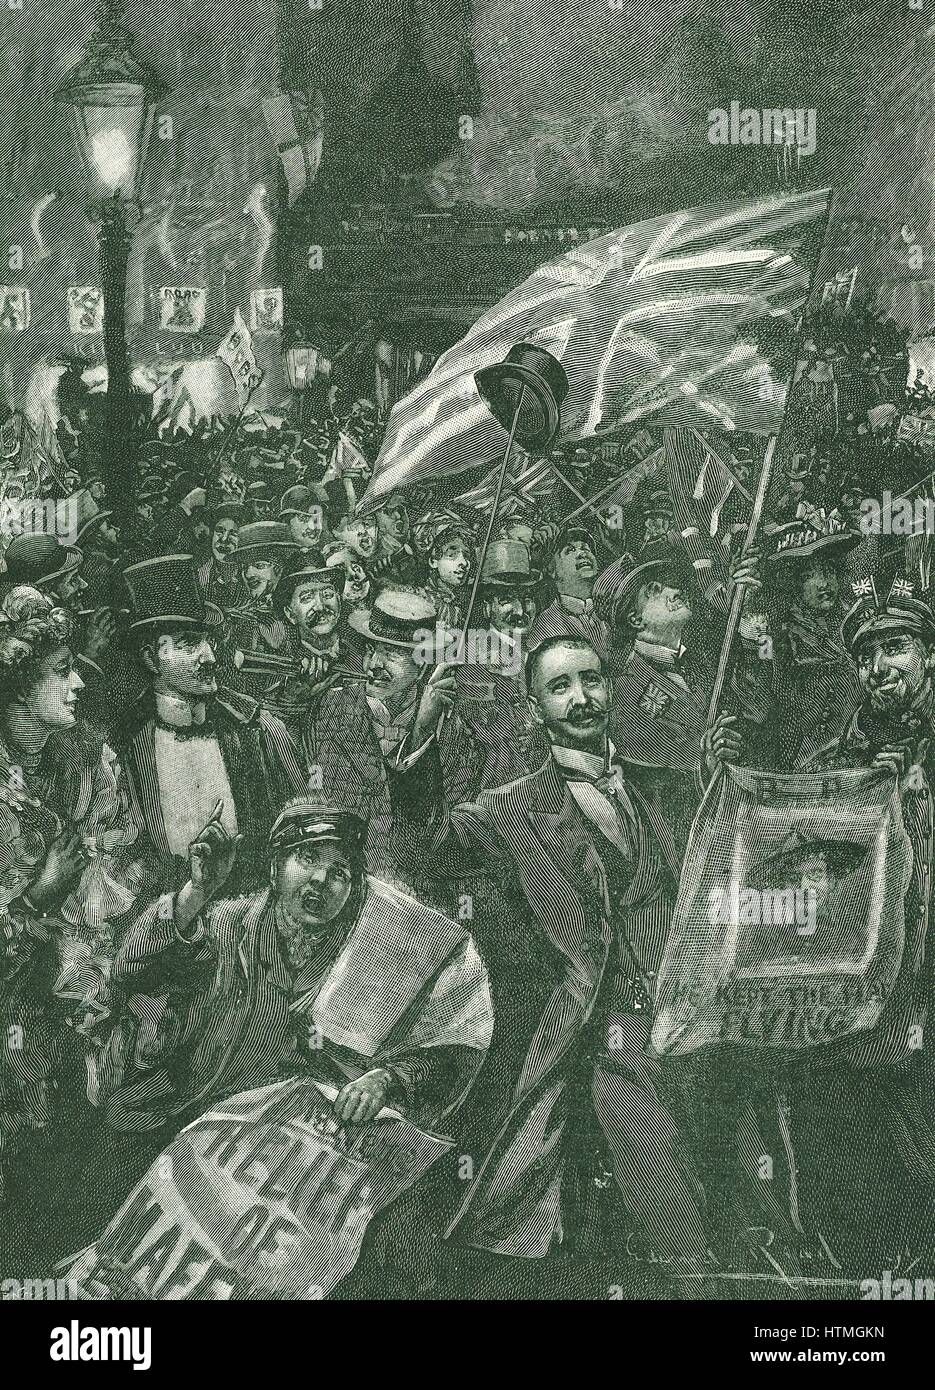 Londoners celebrating the news of the relief of Mafeking. In the Second Boer War the British were besieged at Mafeking from 12 October 1899-17 May 1900. Engraving Stock Photo